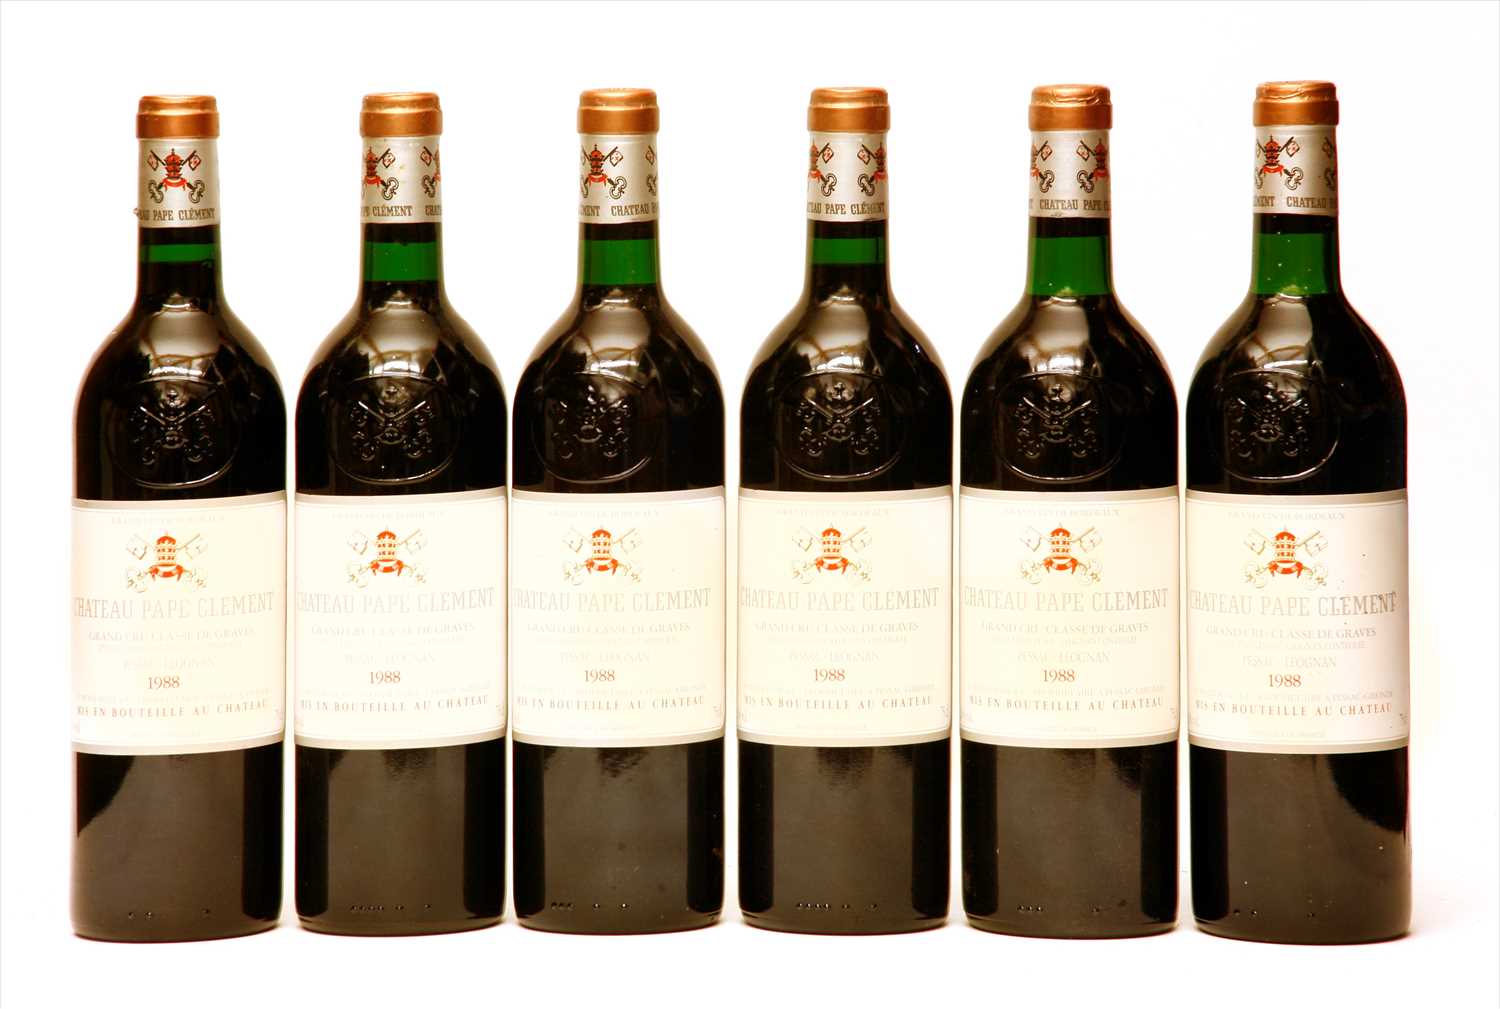 Lot 324 - Chateau Pape Clement, Cru Classe des Graves, 1988, eight bottles (in opened owc)